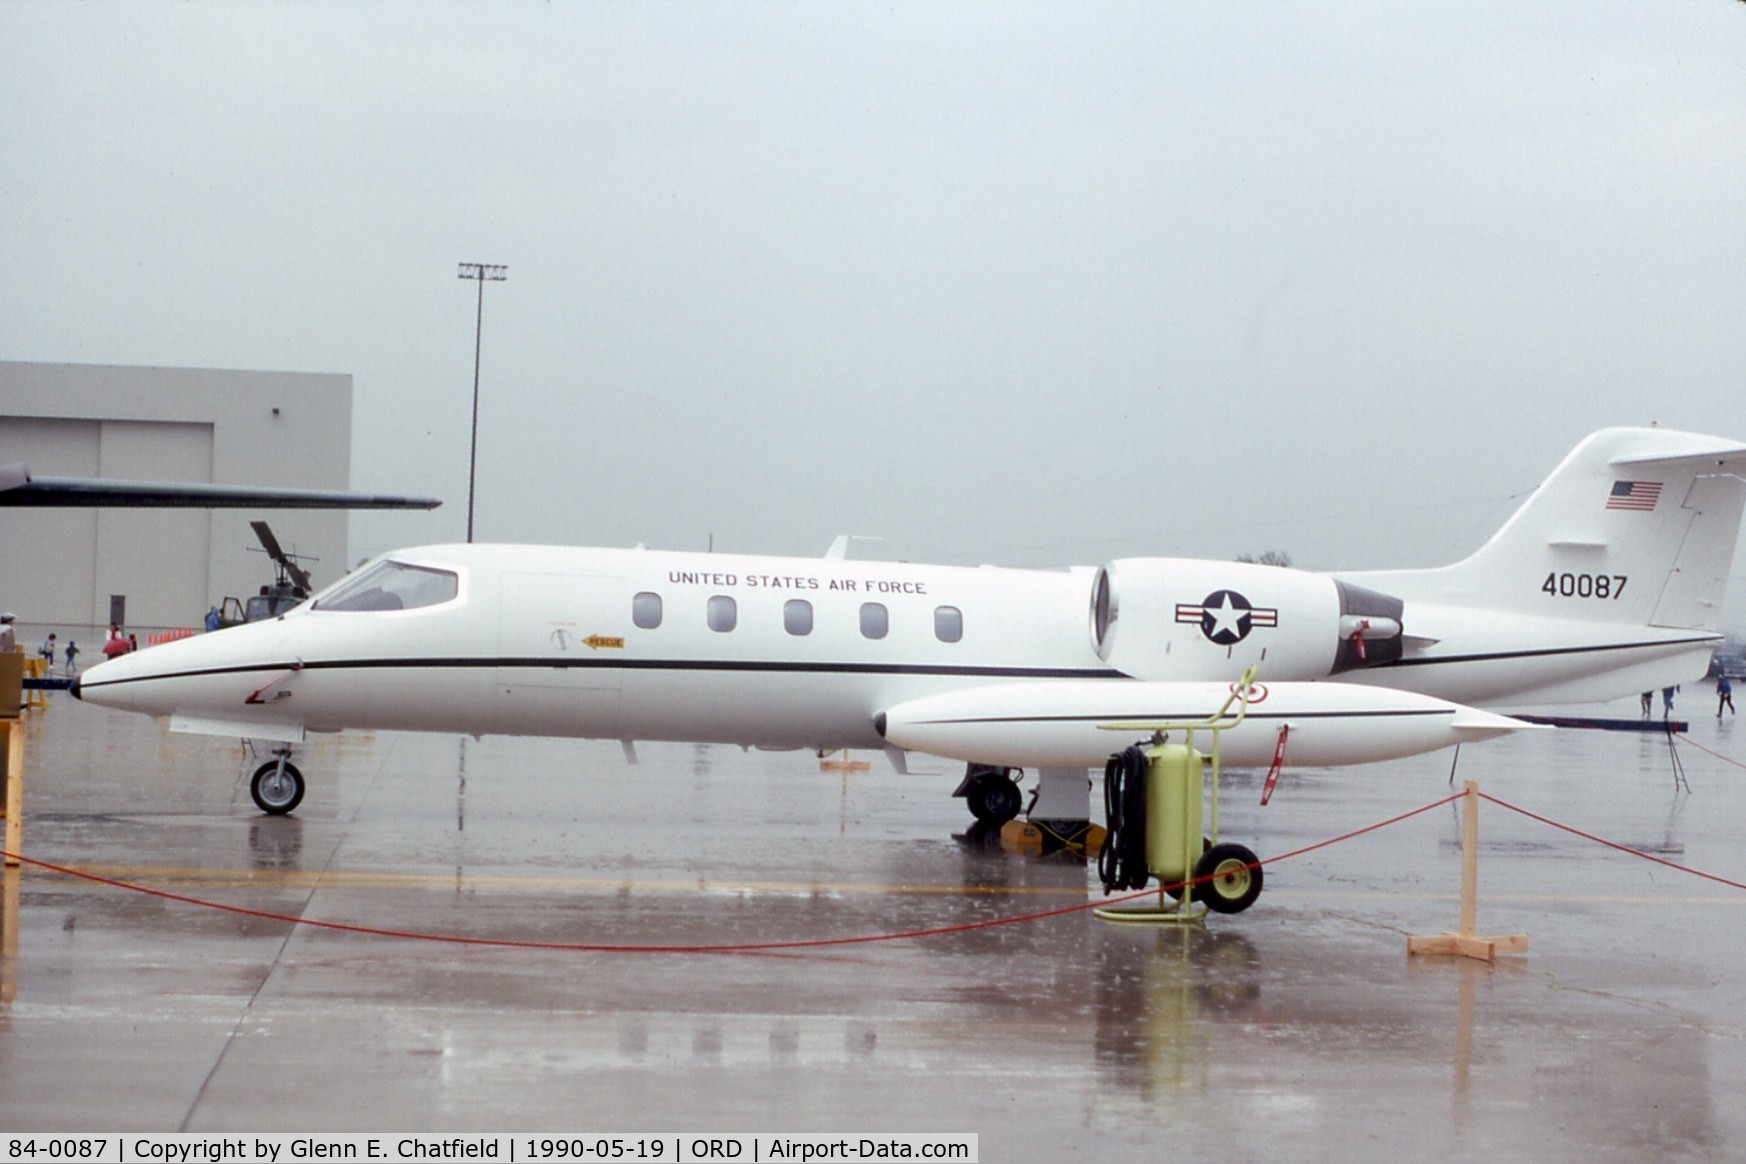 84-0087, 1984 Gates Learjet C-21A C/N 35A-533, C-21A during a rainy open house